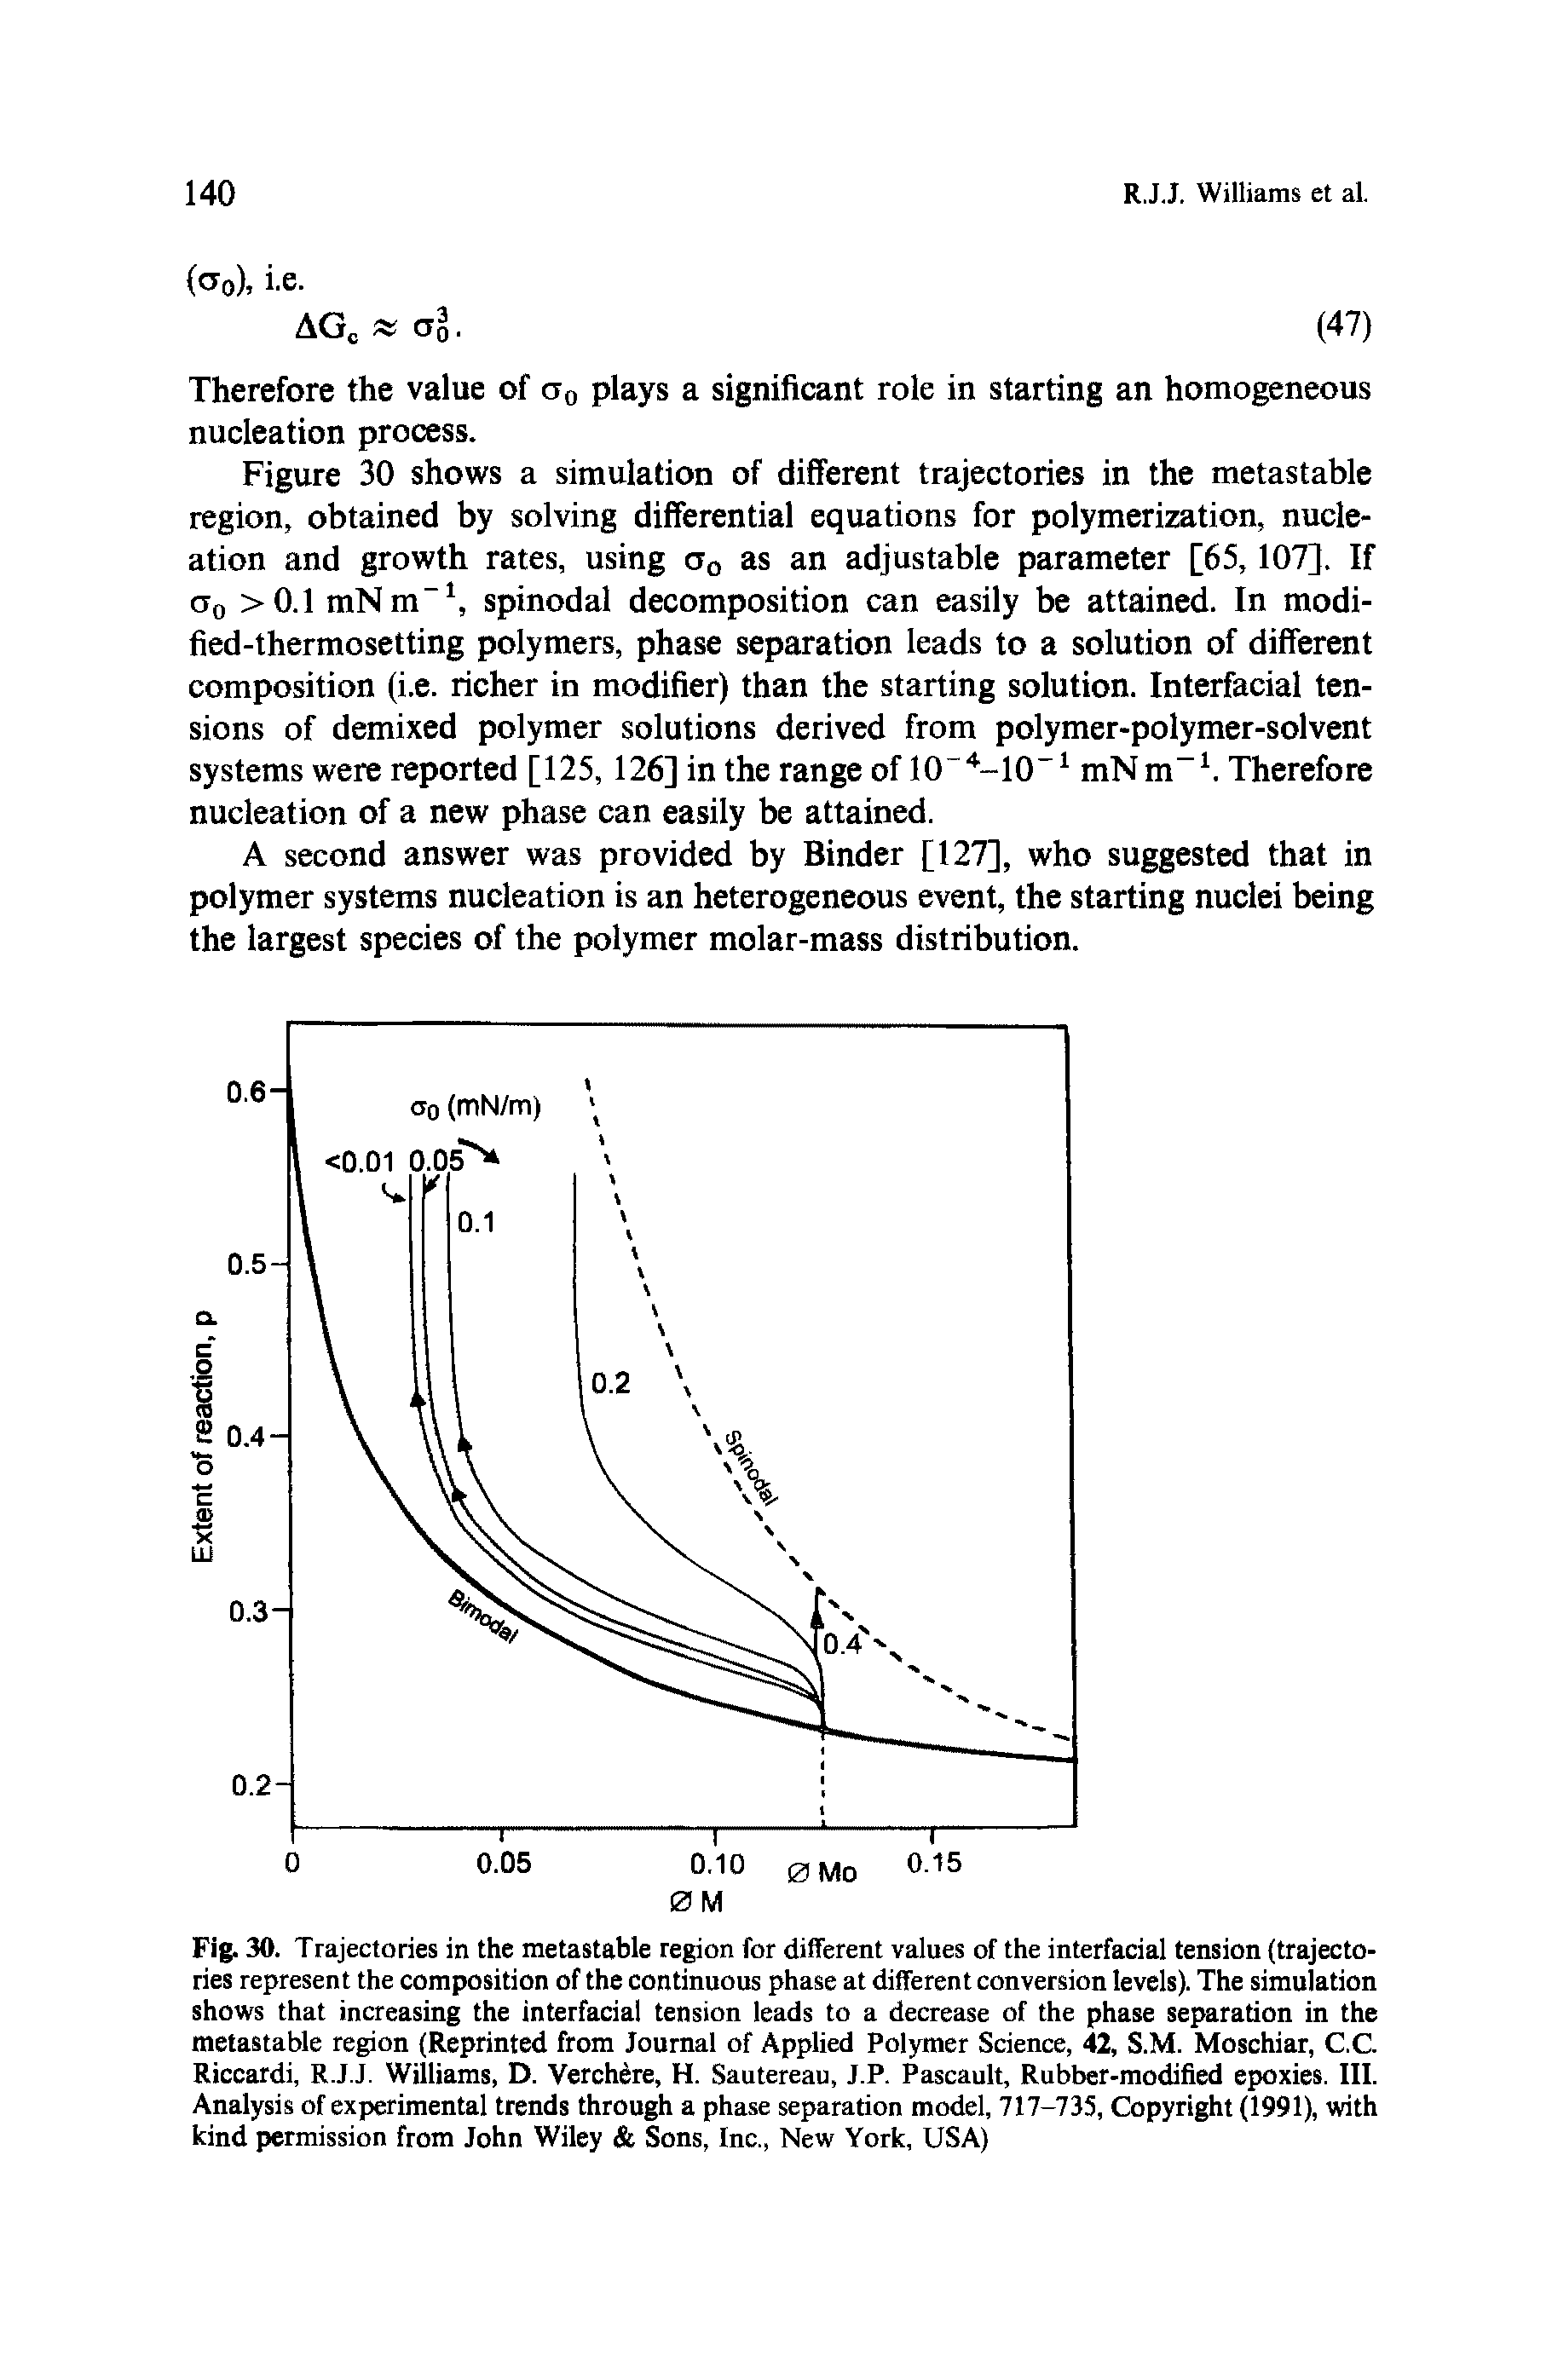 Fig. 30. Trajectories in the metastable region for different values of the interfacial tension (trajectories represent the composition of the continuous phase at different conversion levels). The simulation shows that increasing the interfacial tension leads to a decrease of the phase separation in the metastable region (Reprinted from Journal of Applied Polymer Science, 42, S.M. Moschiar, C.C Riccardi, R.J.J. Williams, D. VerchSre, H. Sautereau, J.P. Pascault, Rubber-modified epoxies. III. Analysis of experimental trends throu a phase separation model, 717-735, Copyright (1991), with kind permission from John Wiley Sons, Inc., New York, USA)...